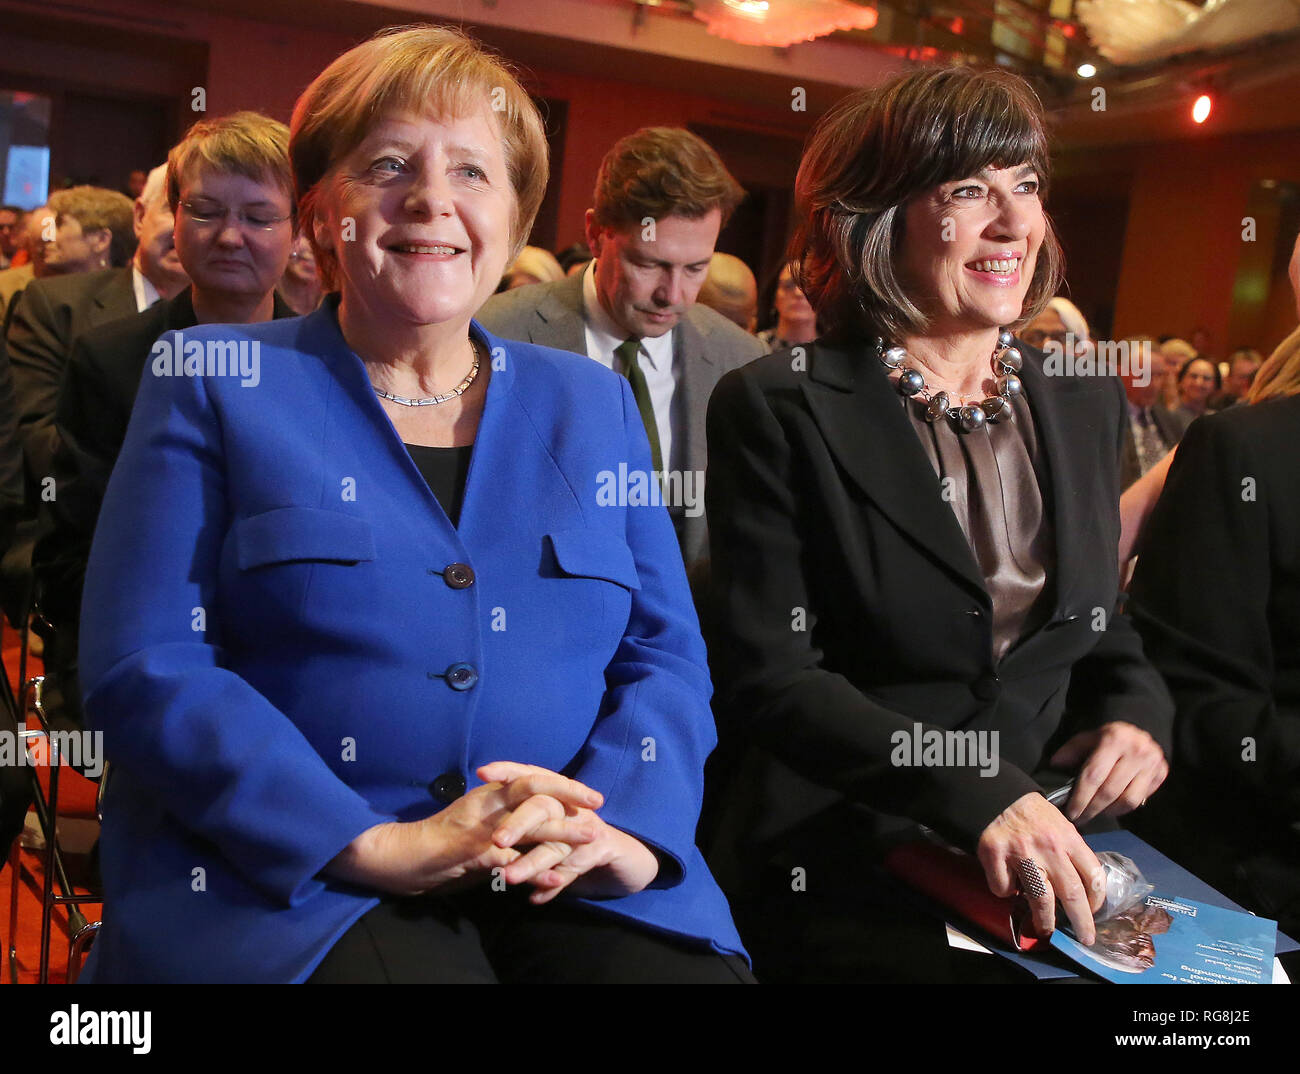 Berlin, Germany. 28th Jan, 2019. Federal Chancellor Angela Merkel (CDU) and Christiane Amanpour (r), journalist, sit in the first row of the Axica Congress and Conference Centre. Merkel receives the American Fulbright Prize for international understanding. Credit: Wolfgang Kumm/dpa/Alamy Live News Stock Photo